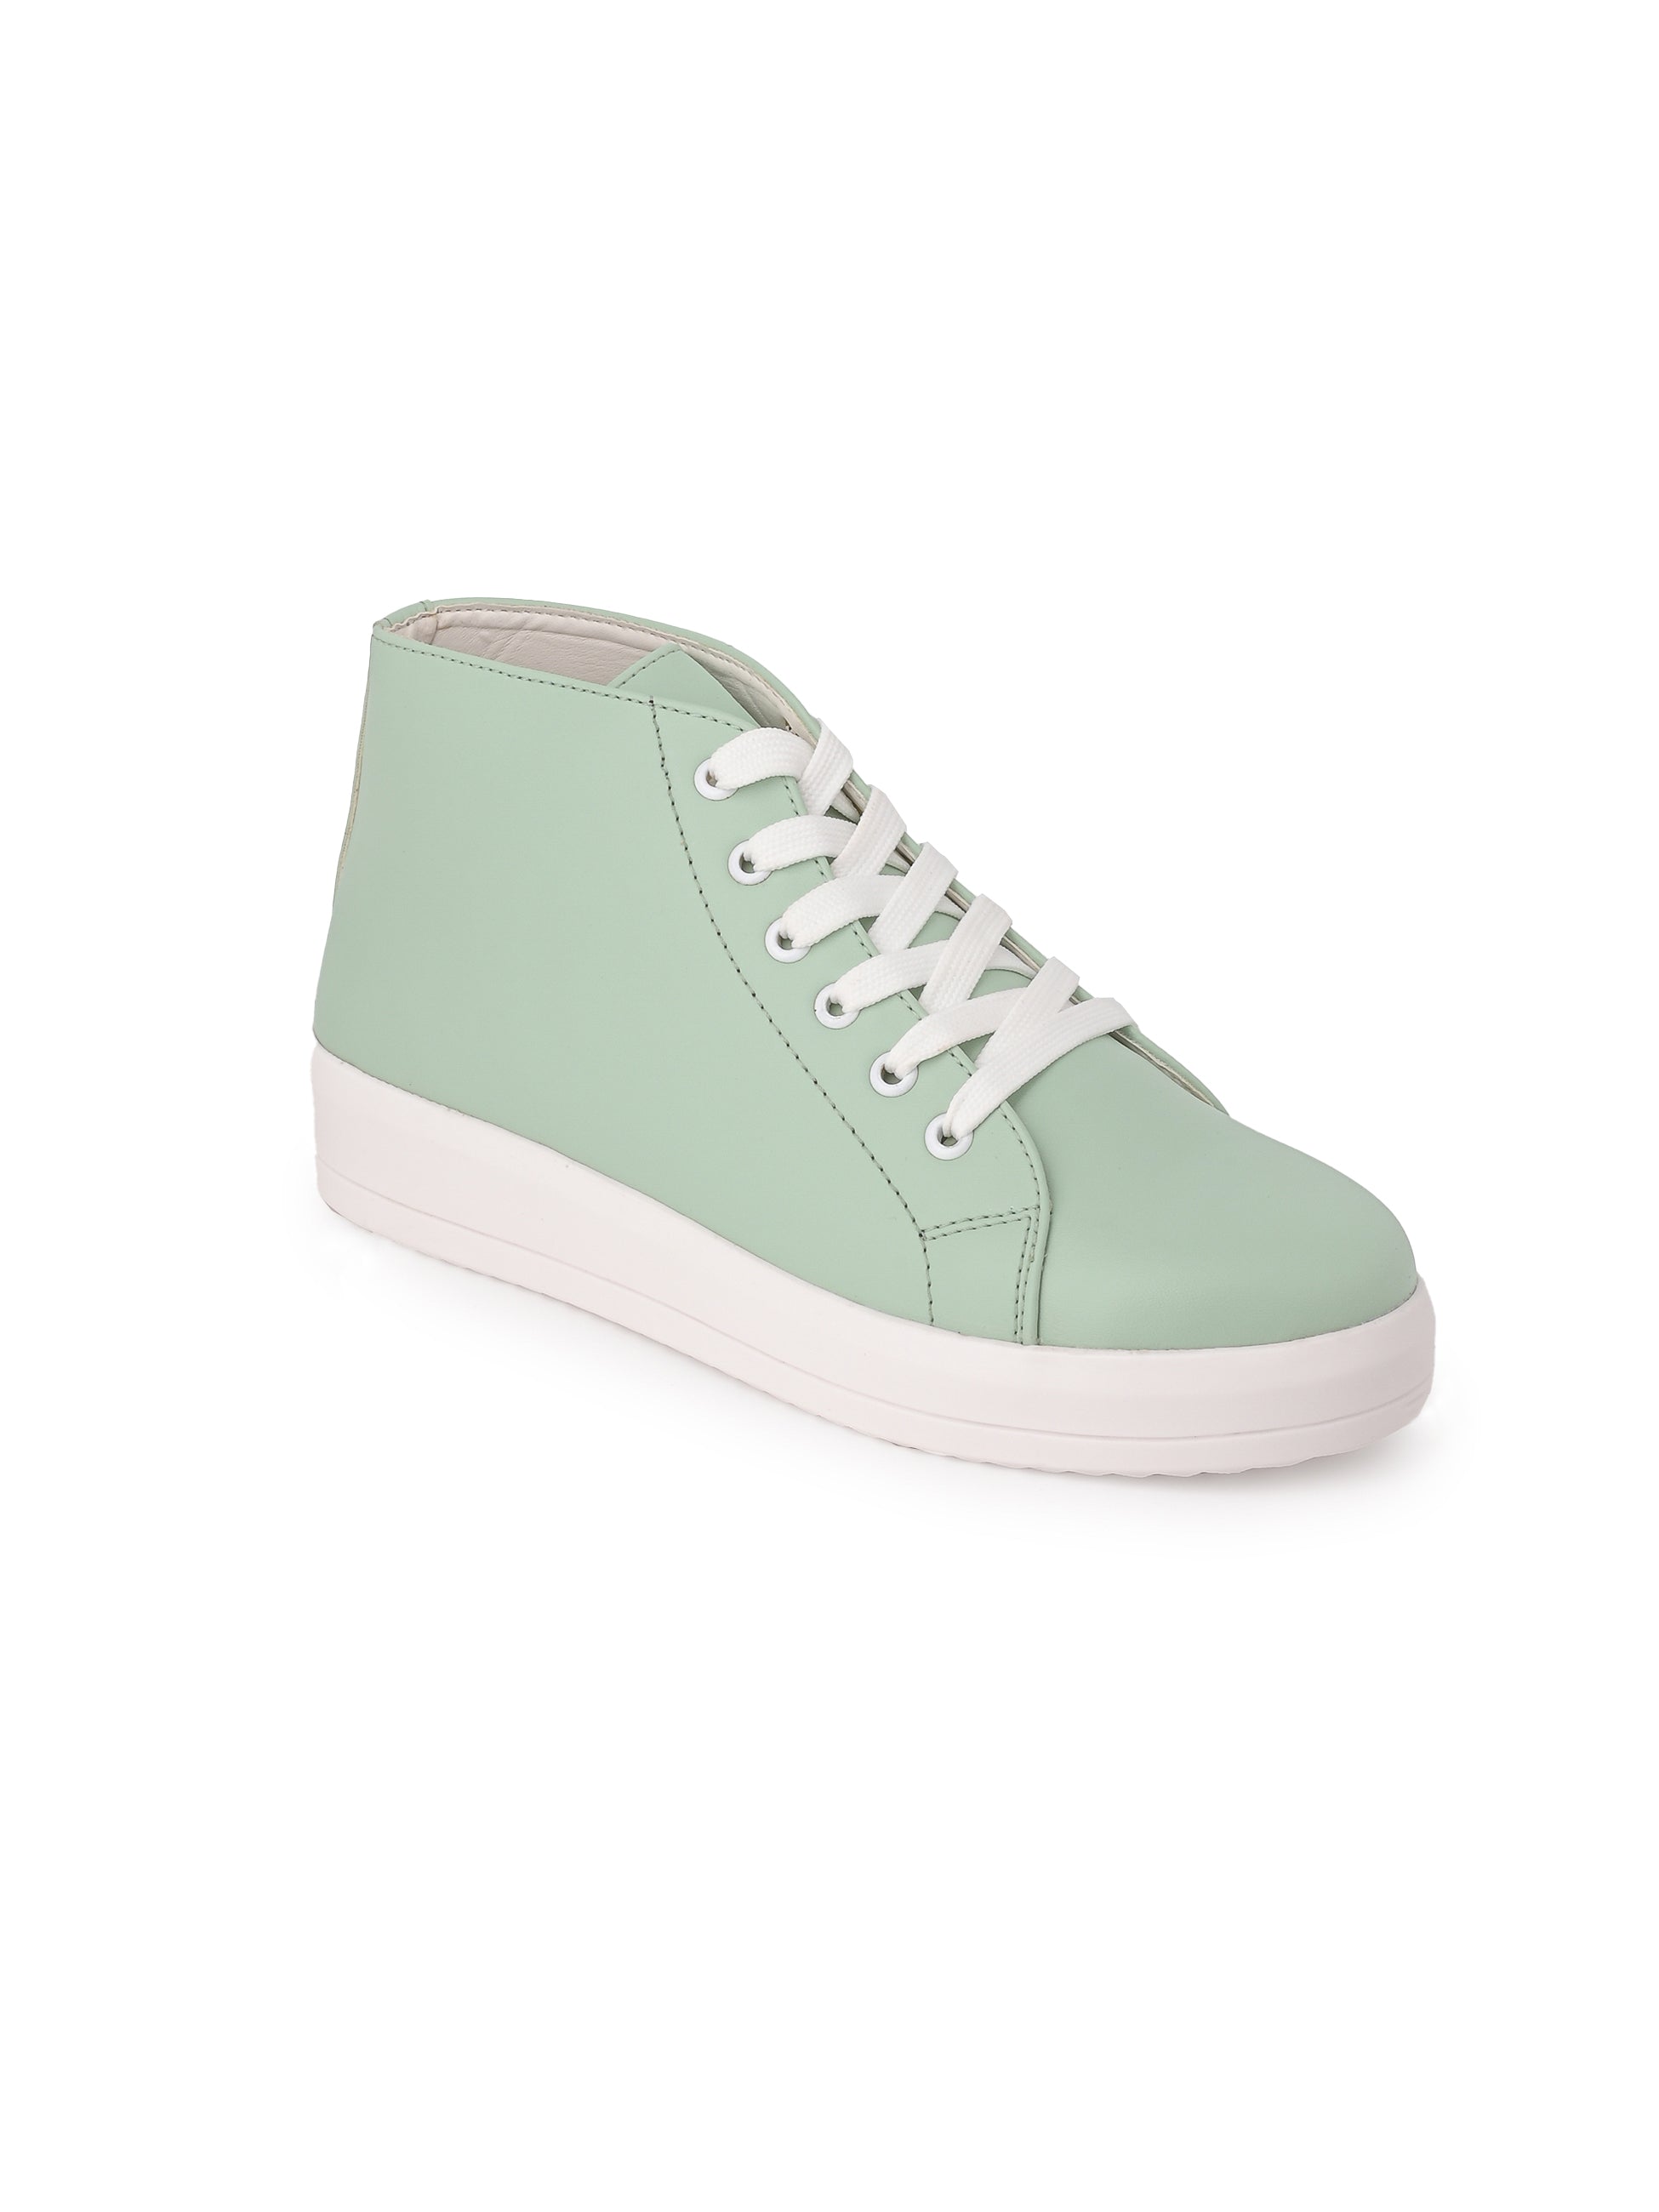 Esmee Cityscape Trainers for Women - Green